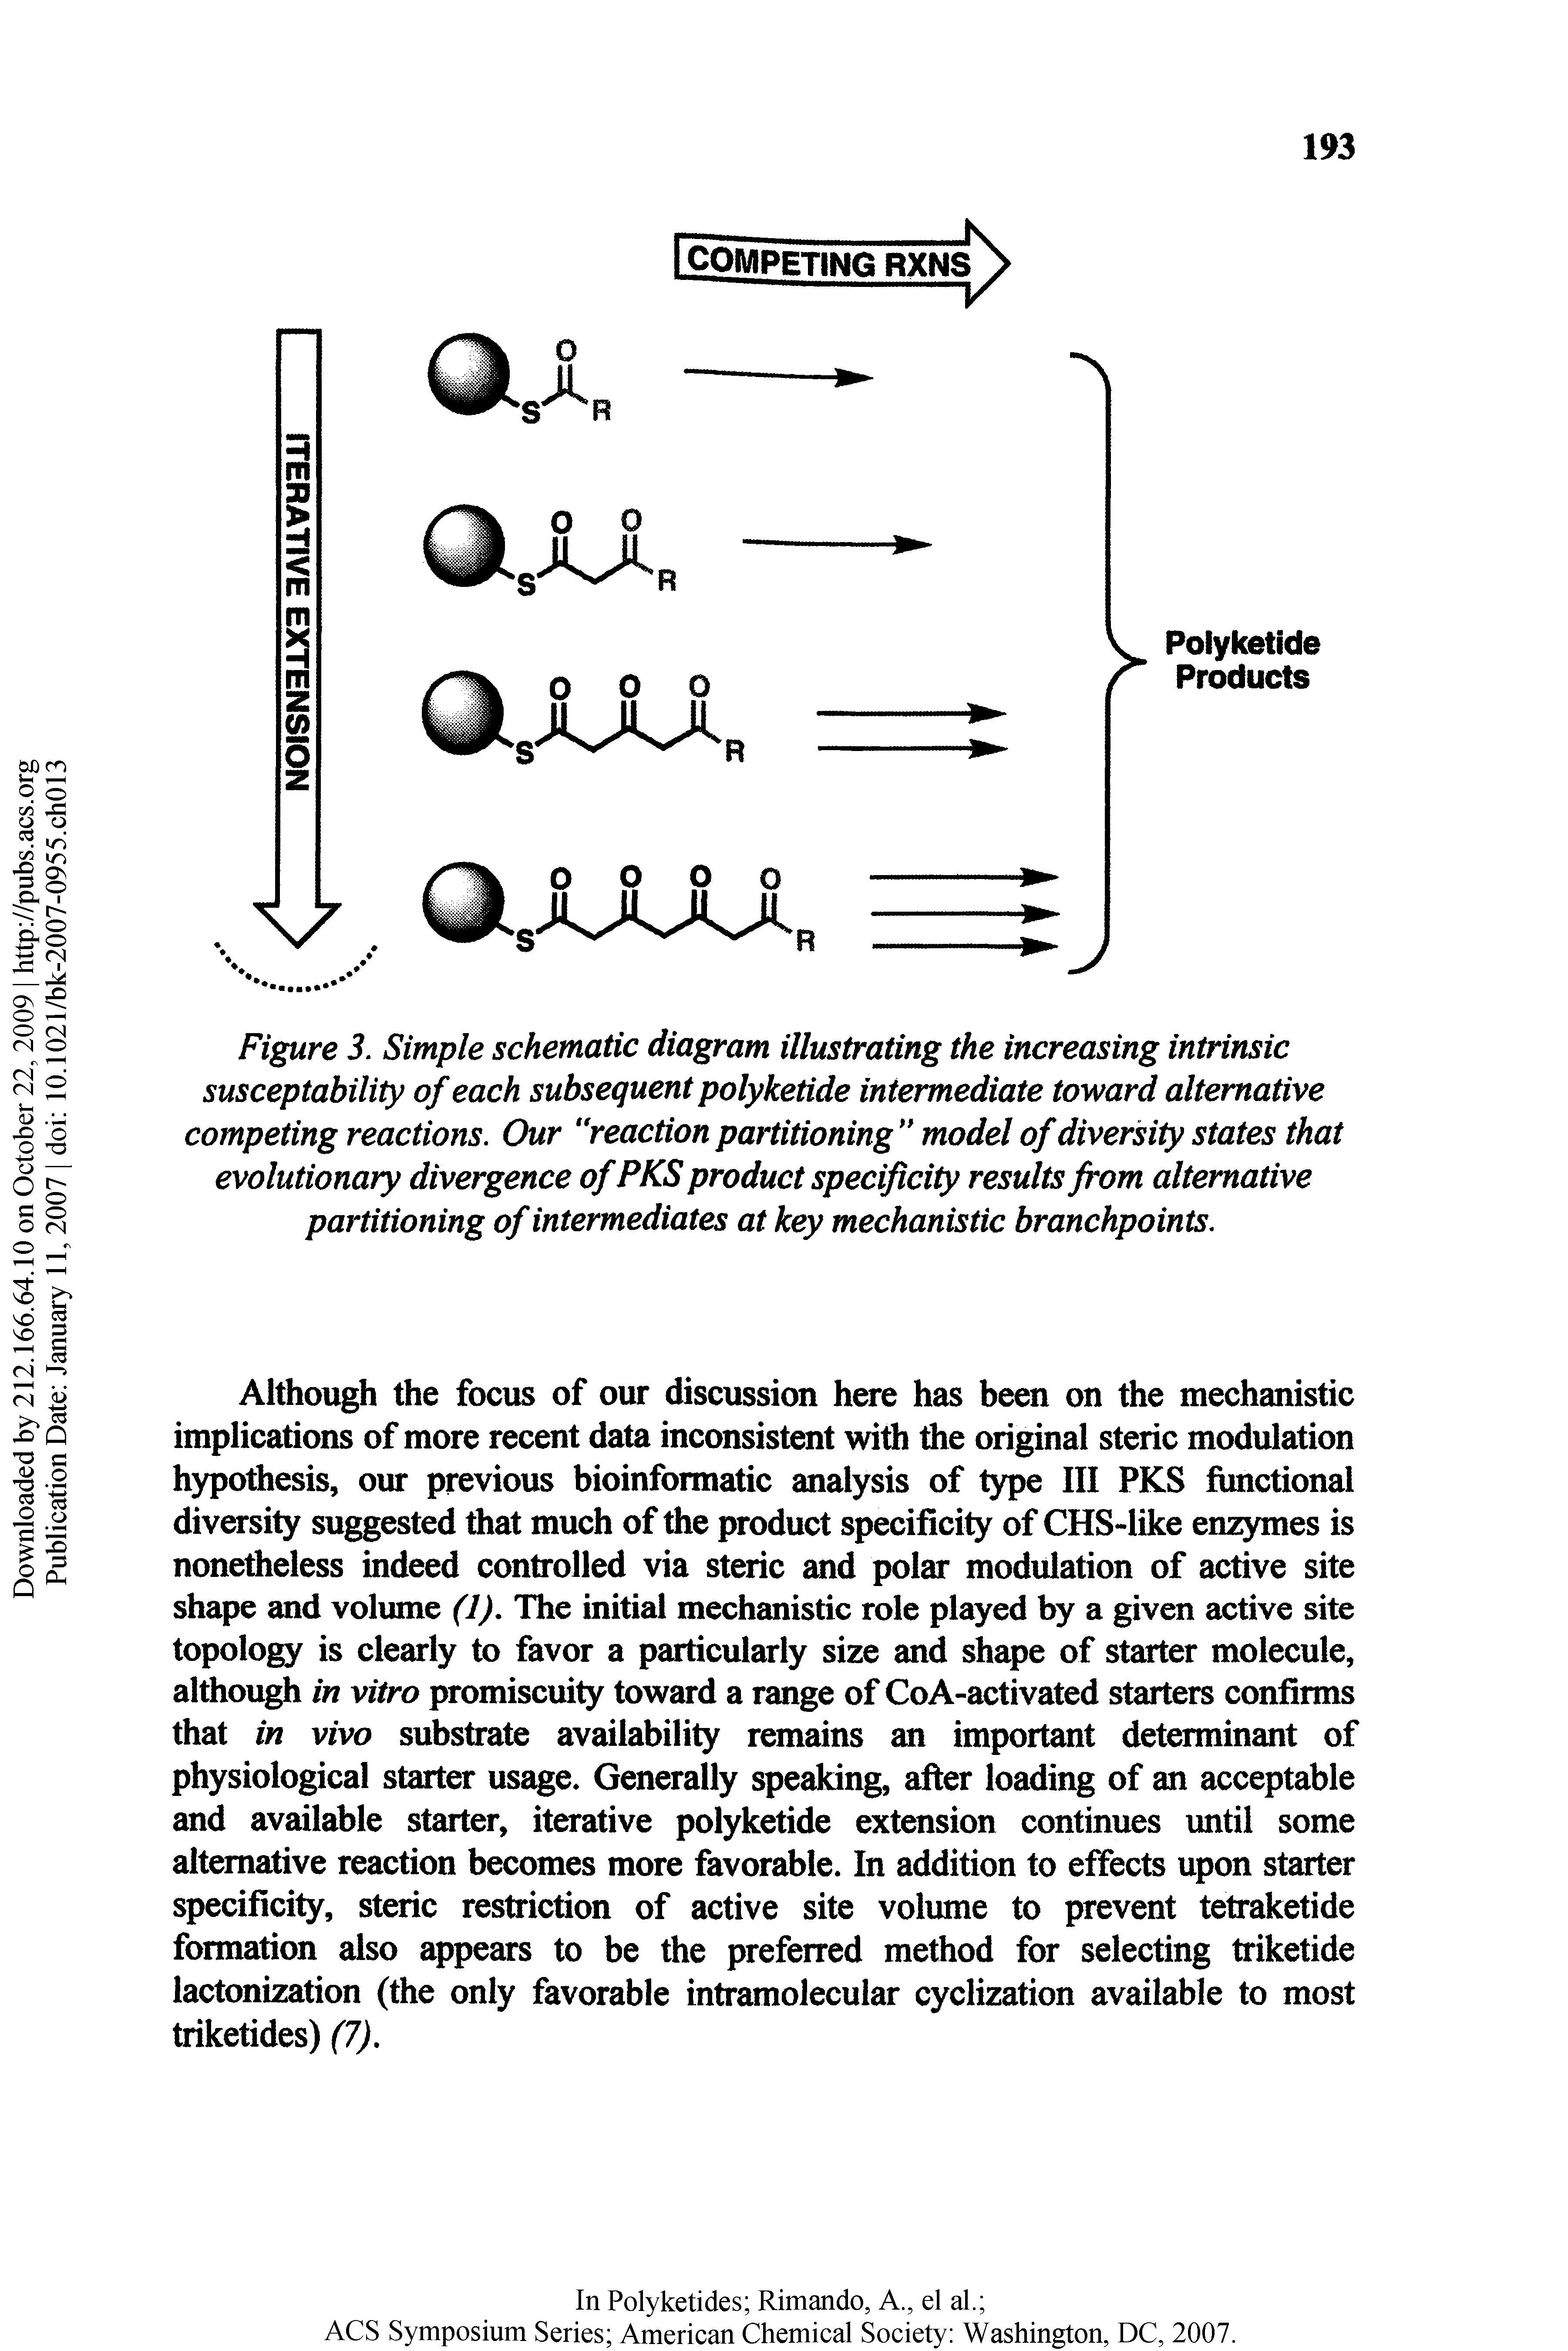 Figure 3. Simple schematic diagram illustrating the increasing intrinsic susceptability of each subsequent polyketide intermediate toward alternative competing reactions. Our Reaction partitioning model of diversity states that evolutionary divergence of PKS product specificity results from alternative partitioning of intermediates at key mechanistic branchpoints.